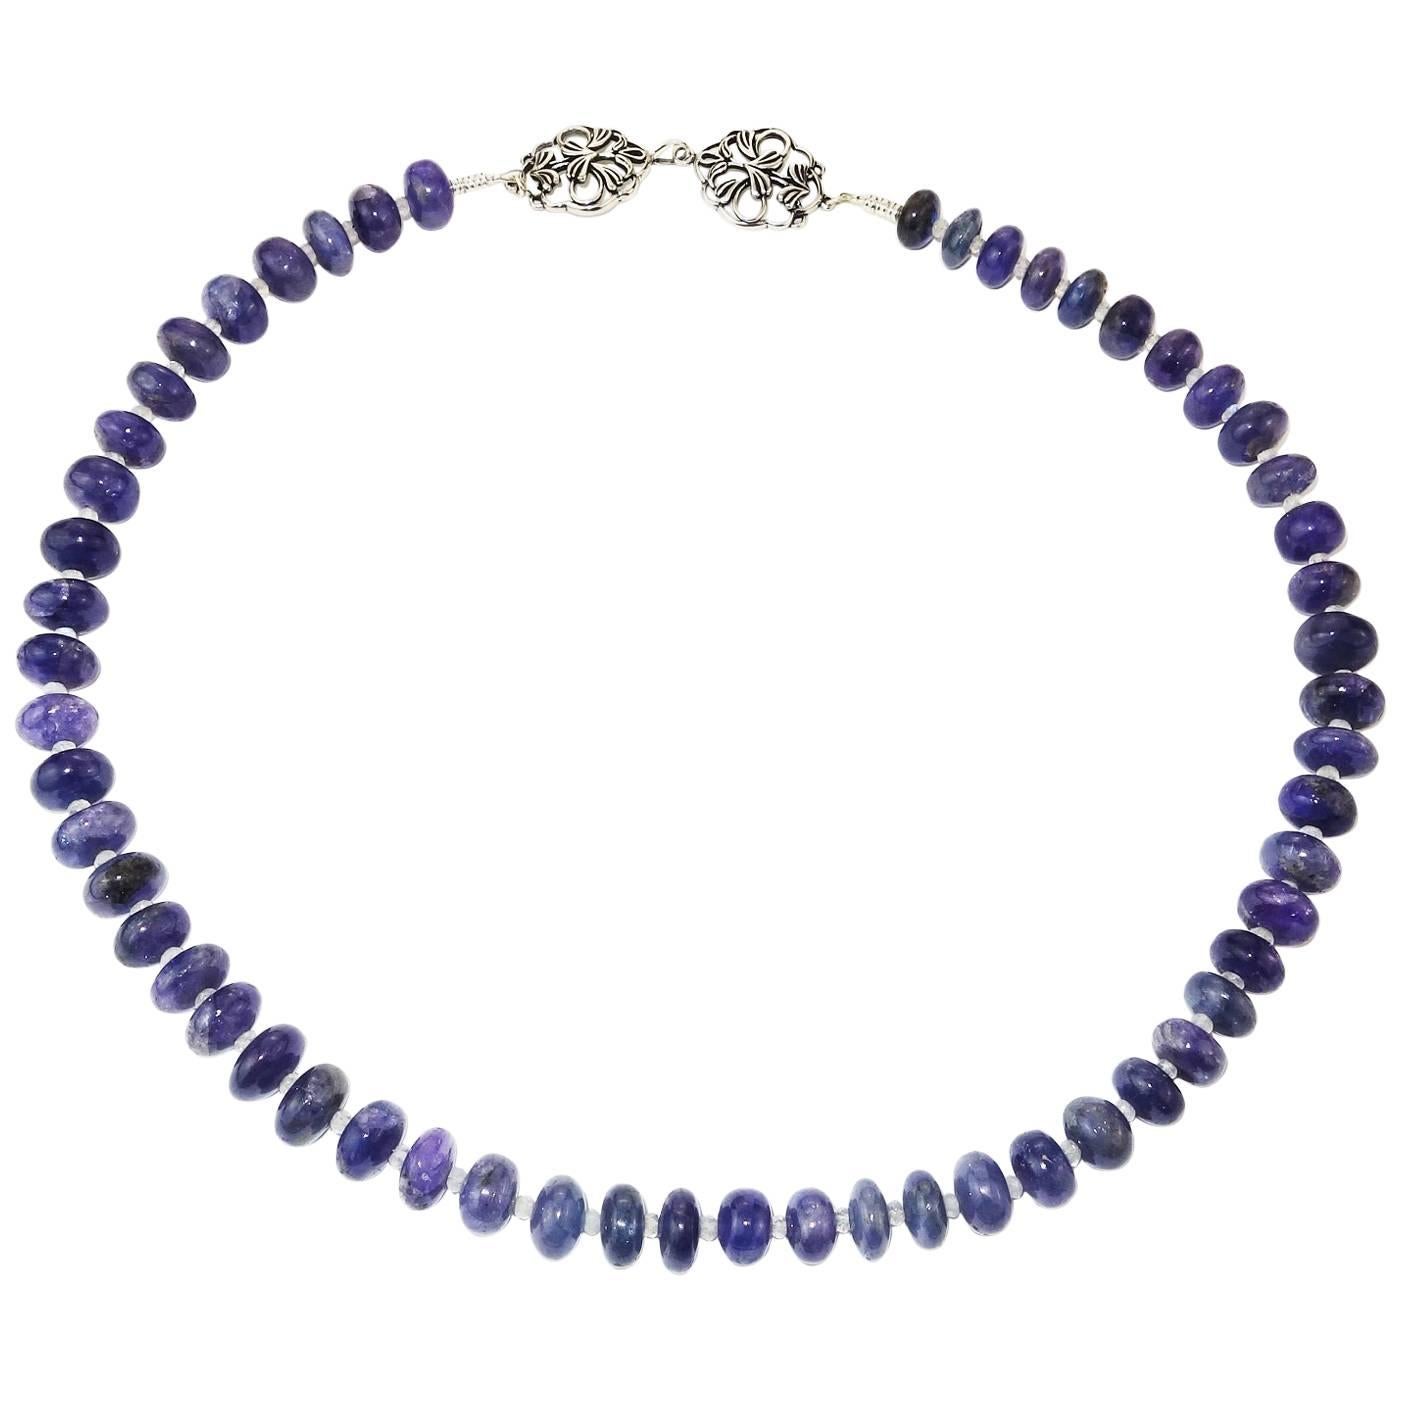 Gorgeous Translucent Tanzanite Rondel Necklace with Sterling Silver Clasp